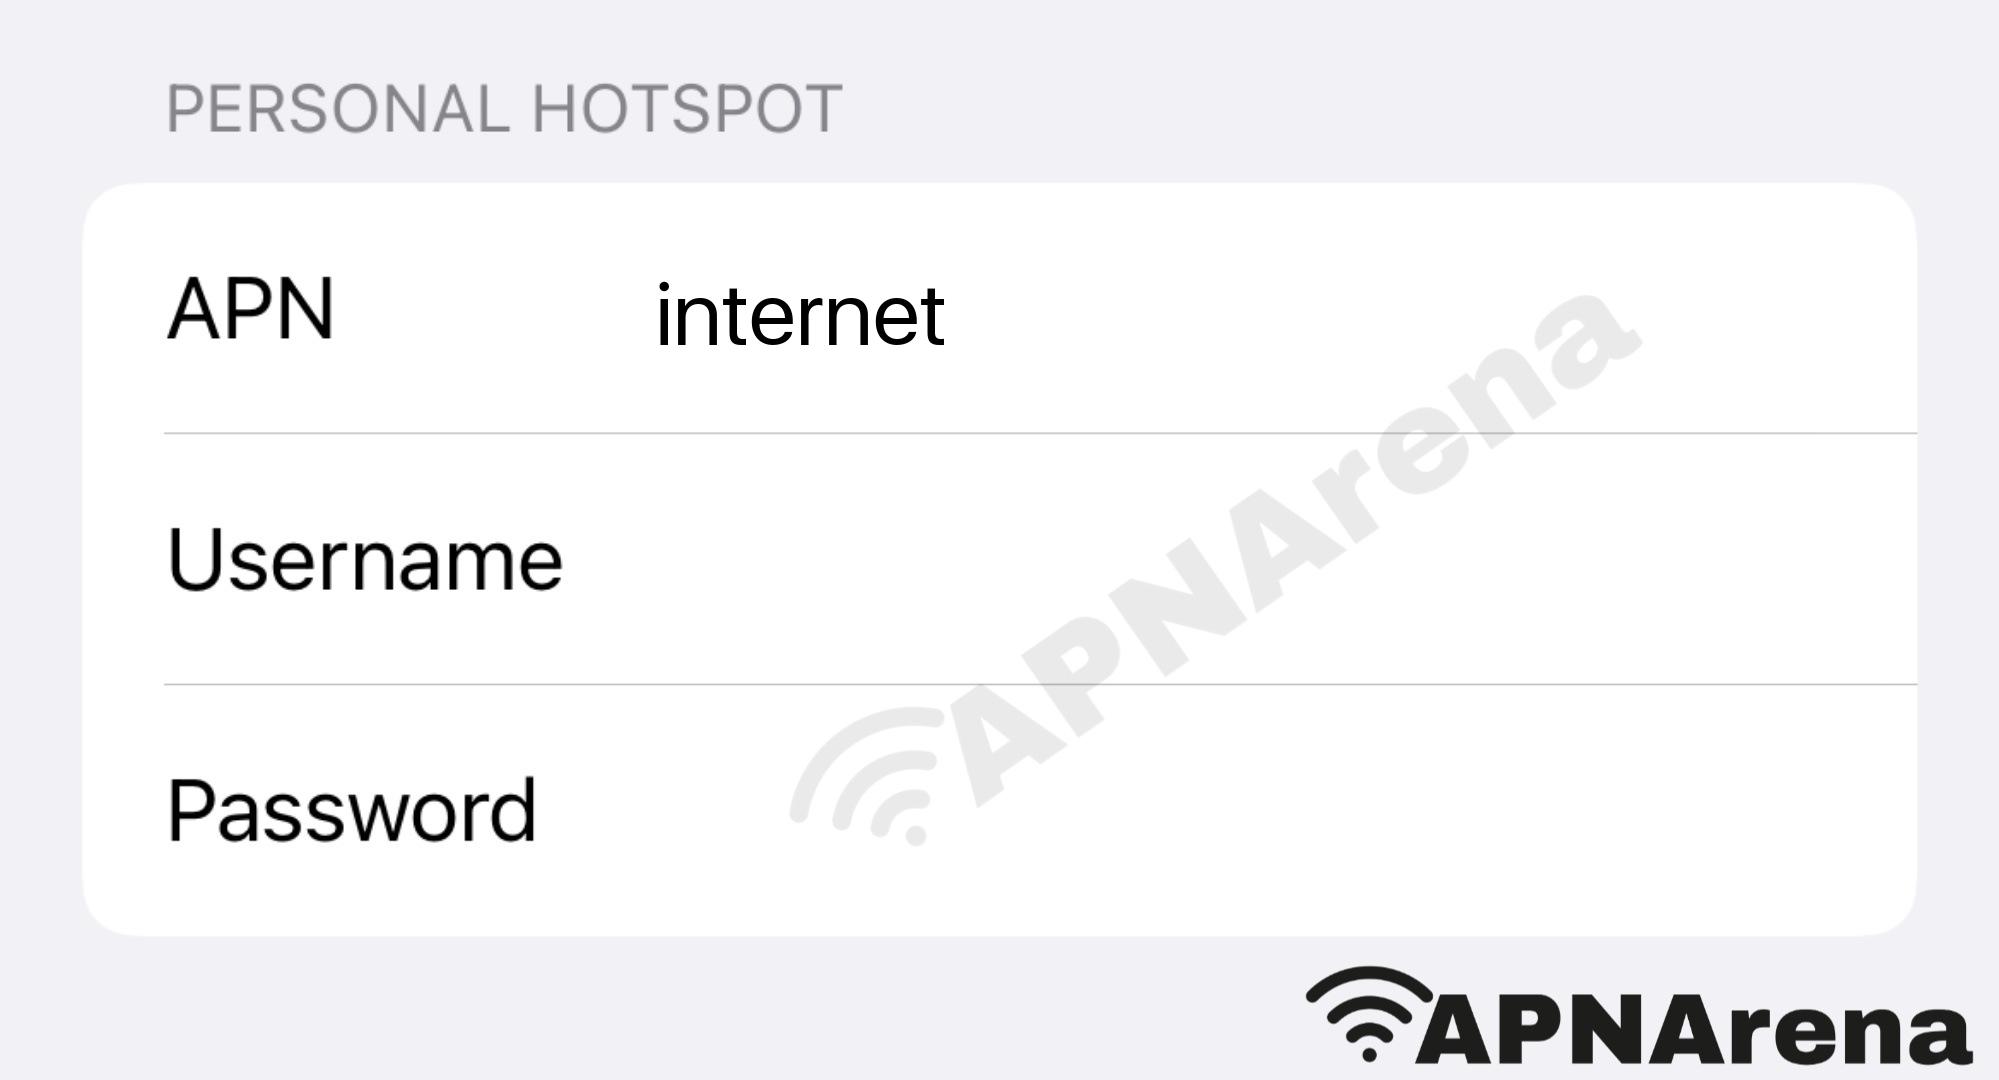 OTG Mobile Personal Hotspot Settings for iPhone